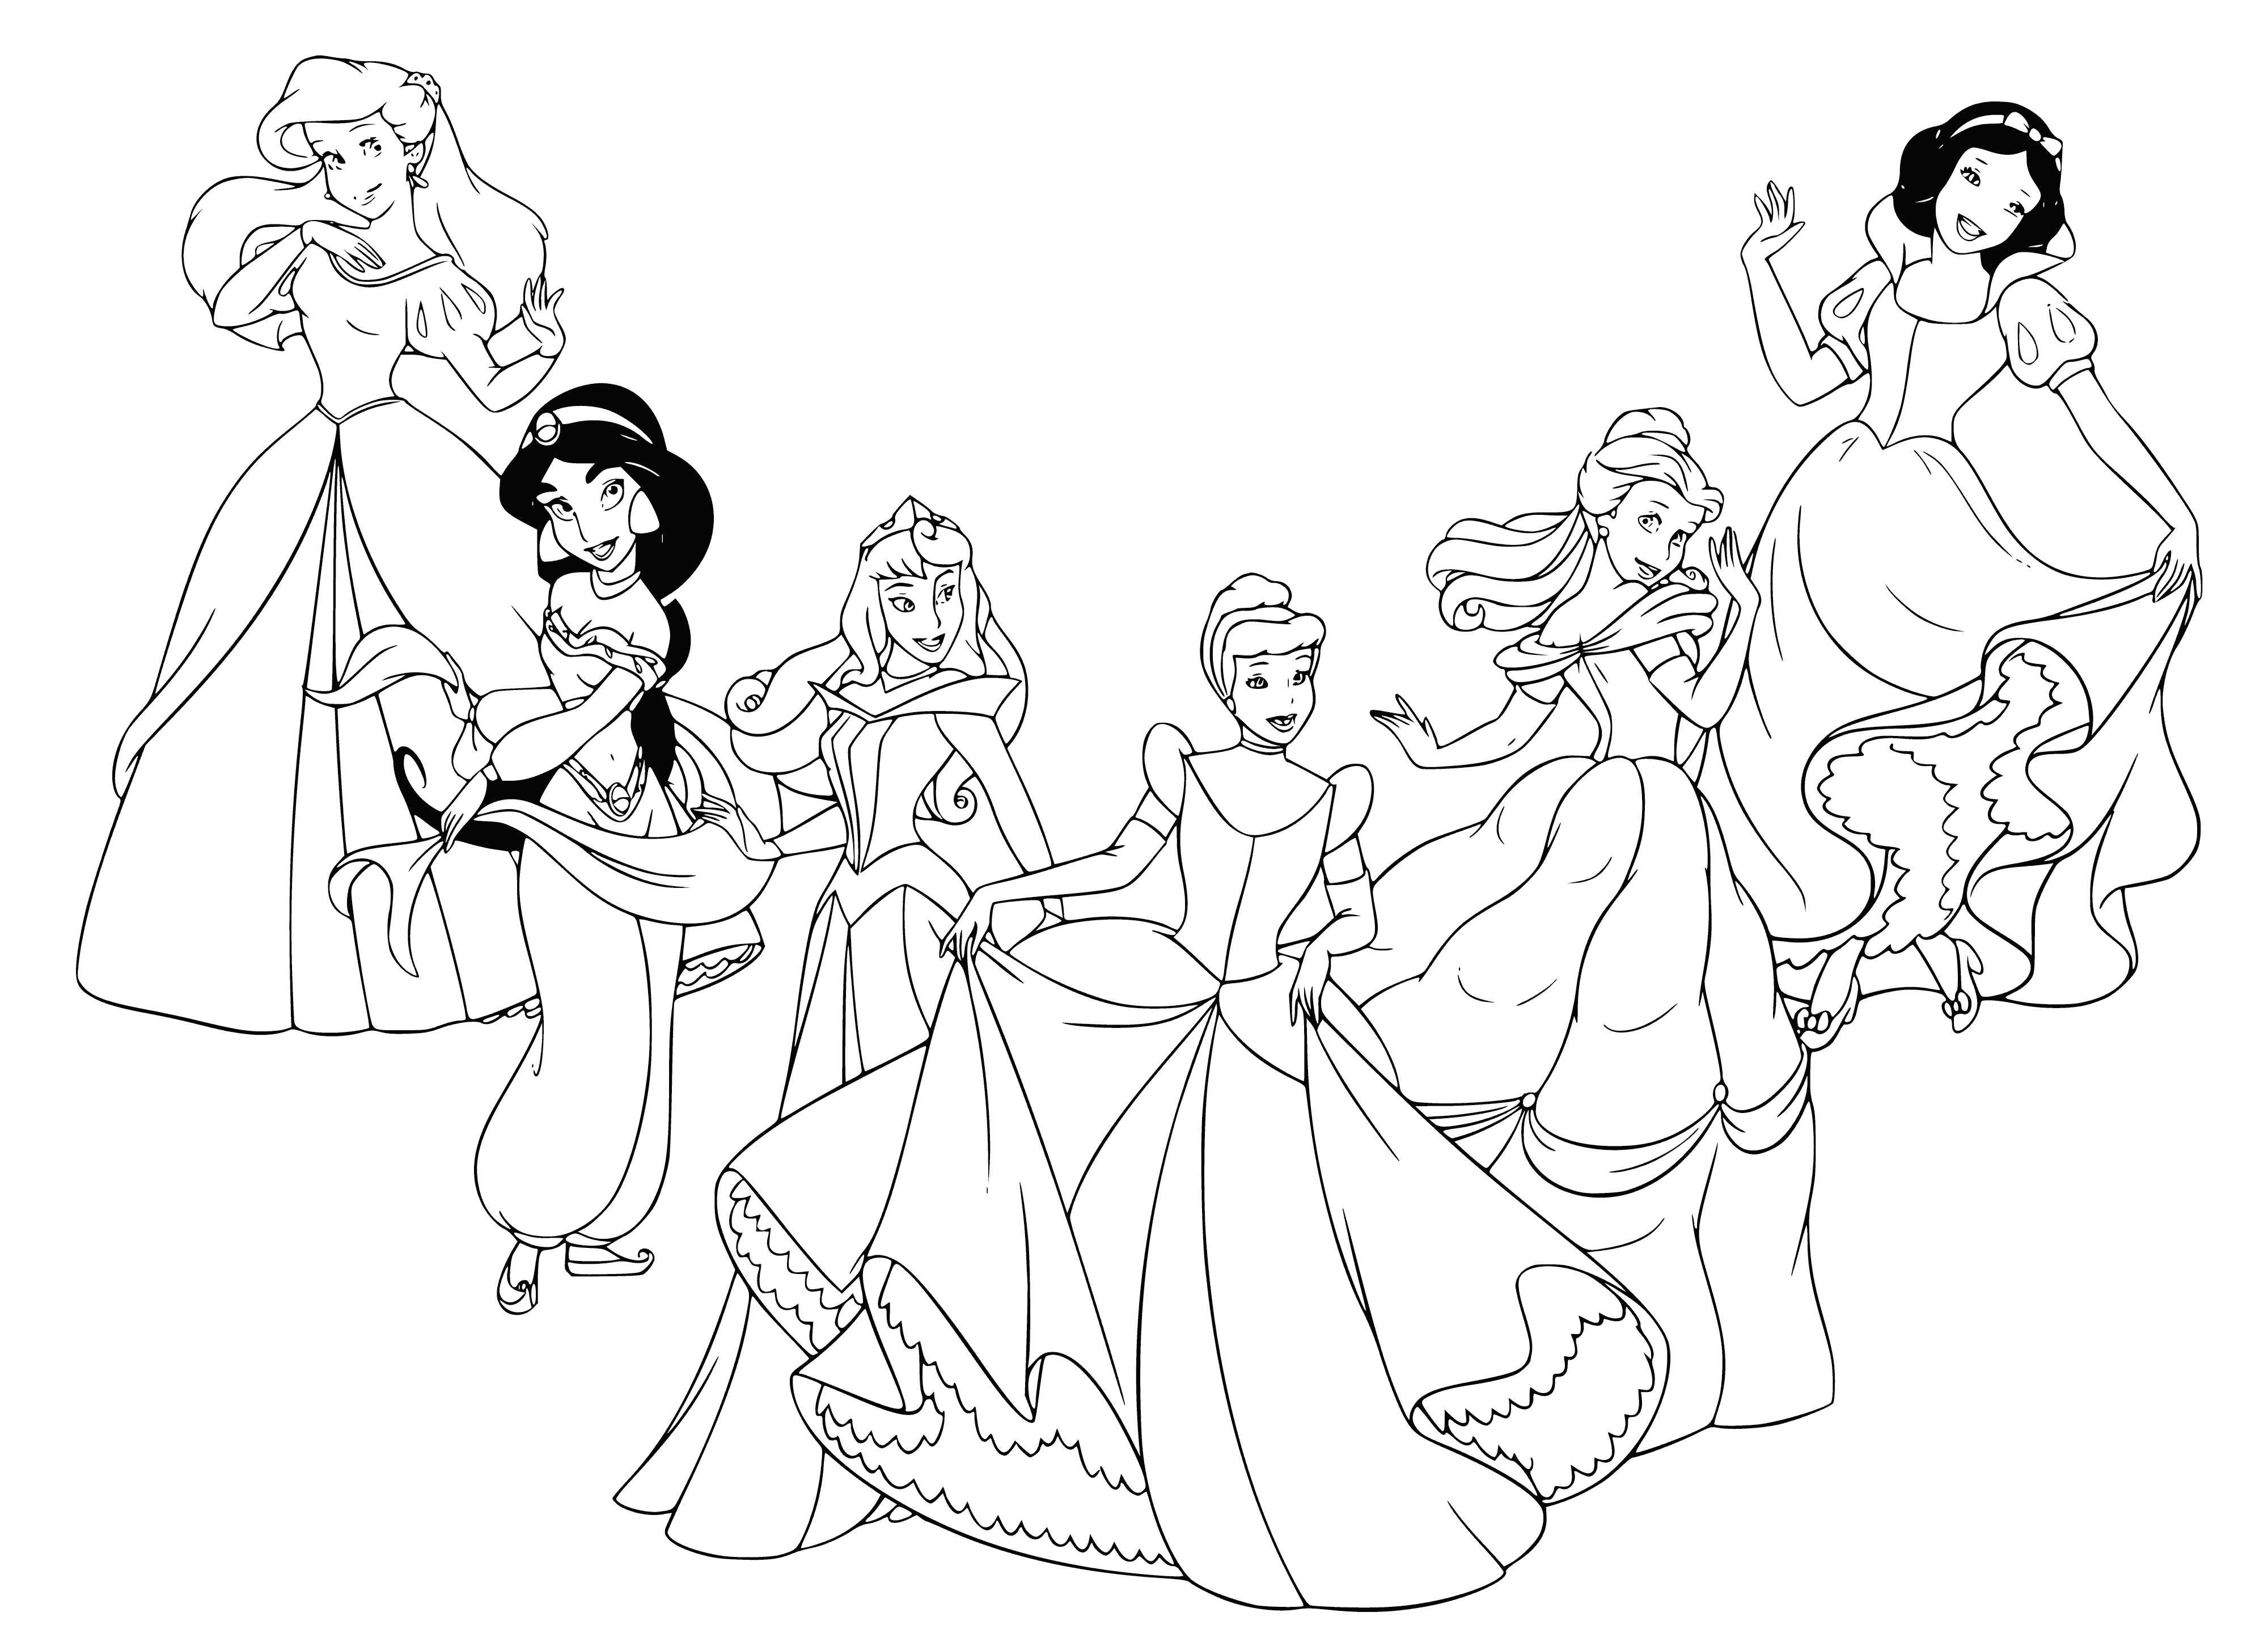 Disney princesses together coloring page